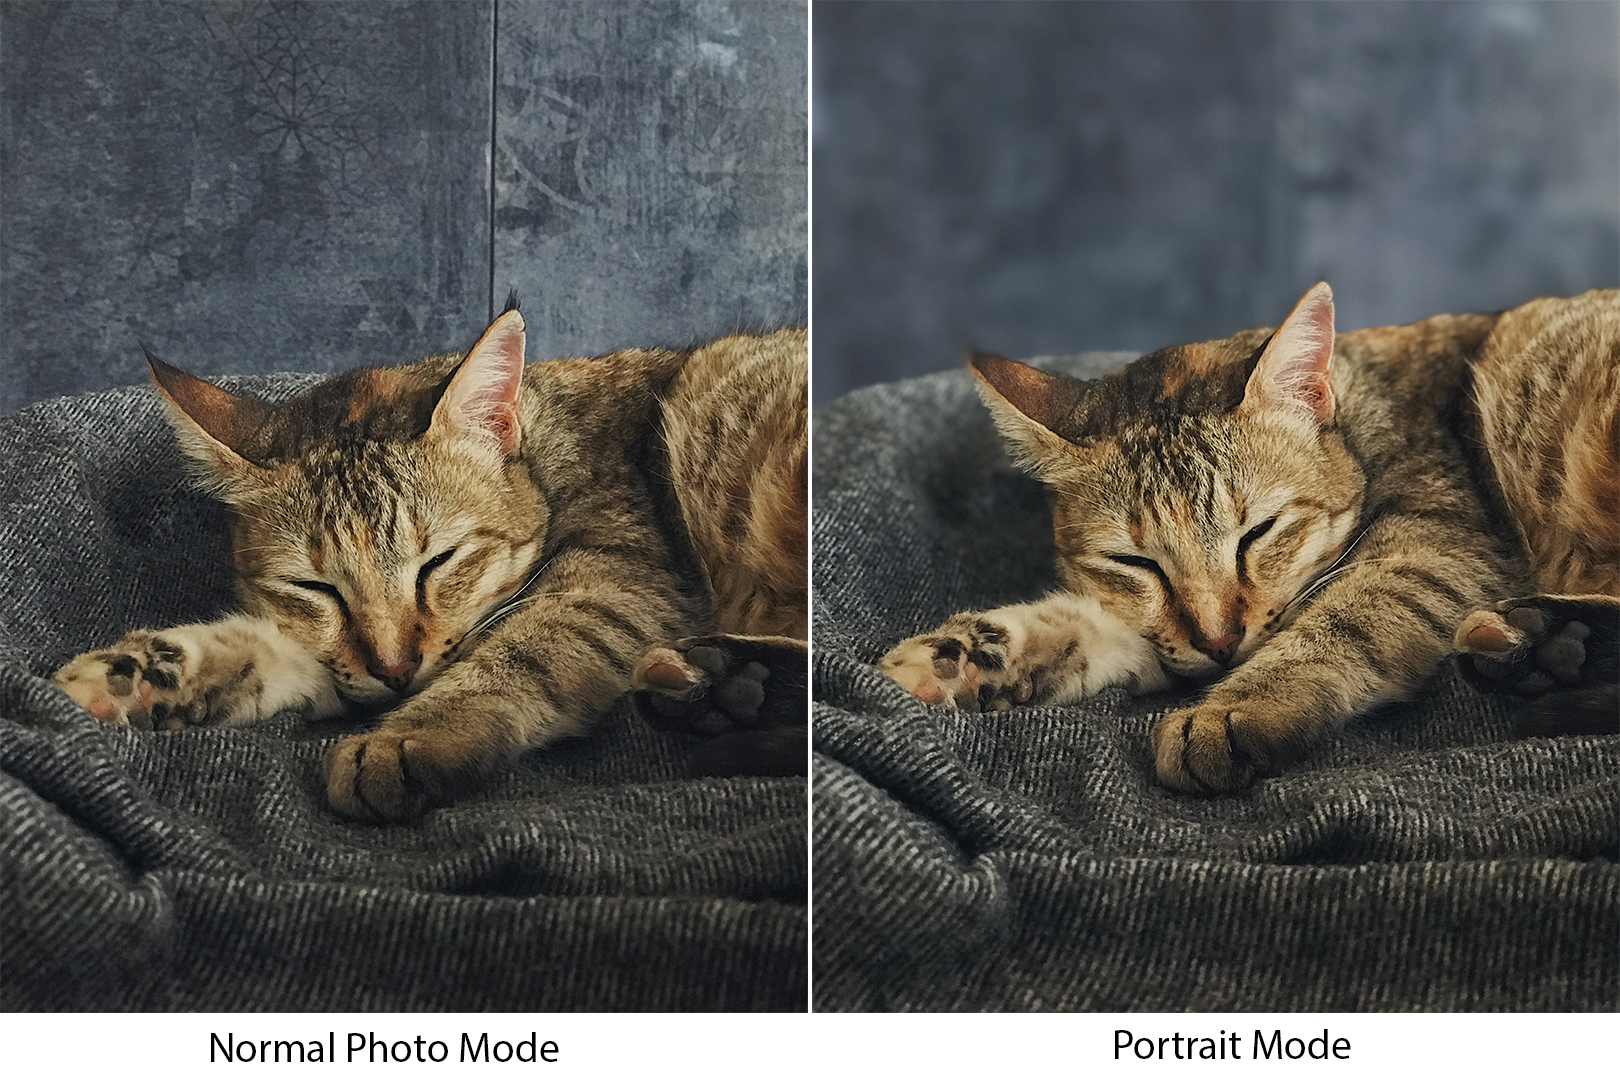 How To Blur A Photo Background On iPhone Or Android | Light Stalking